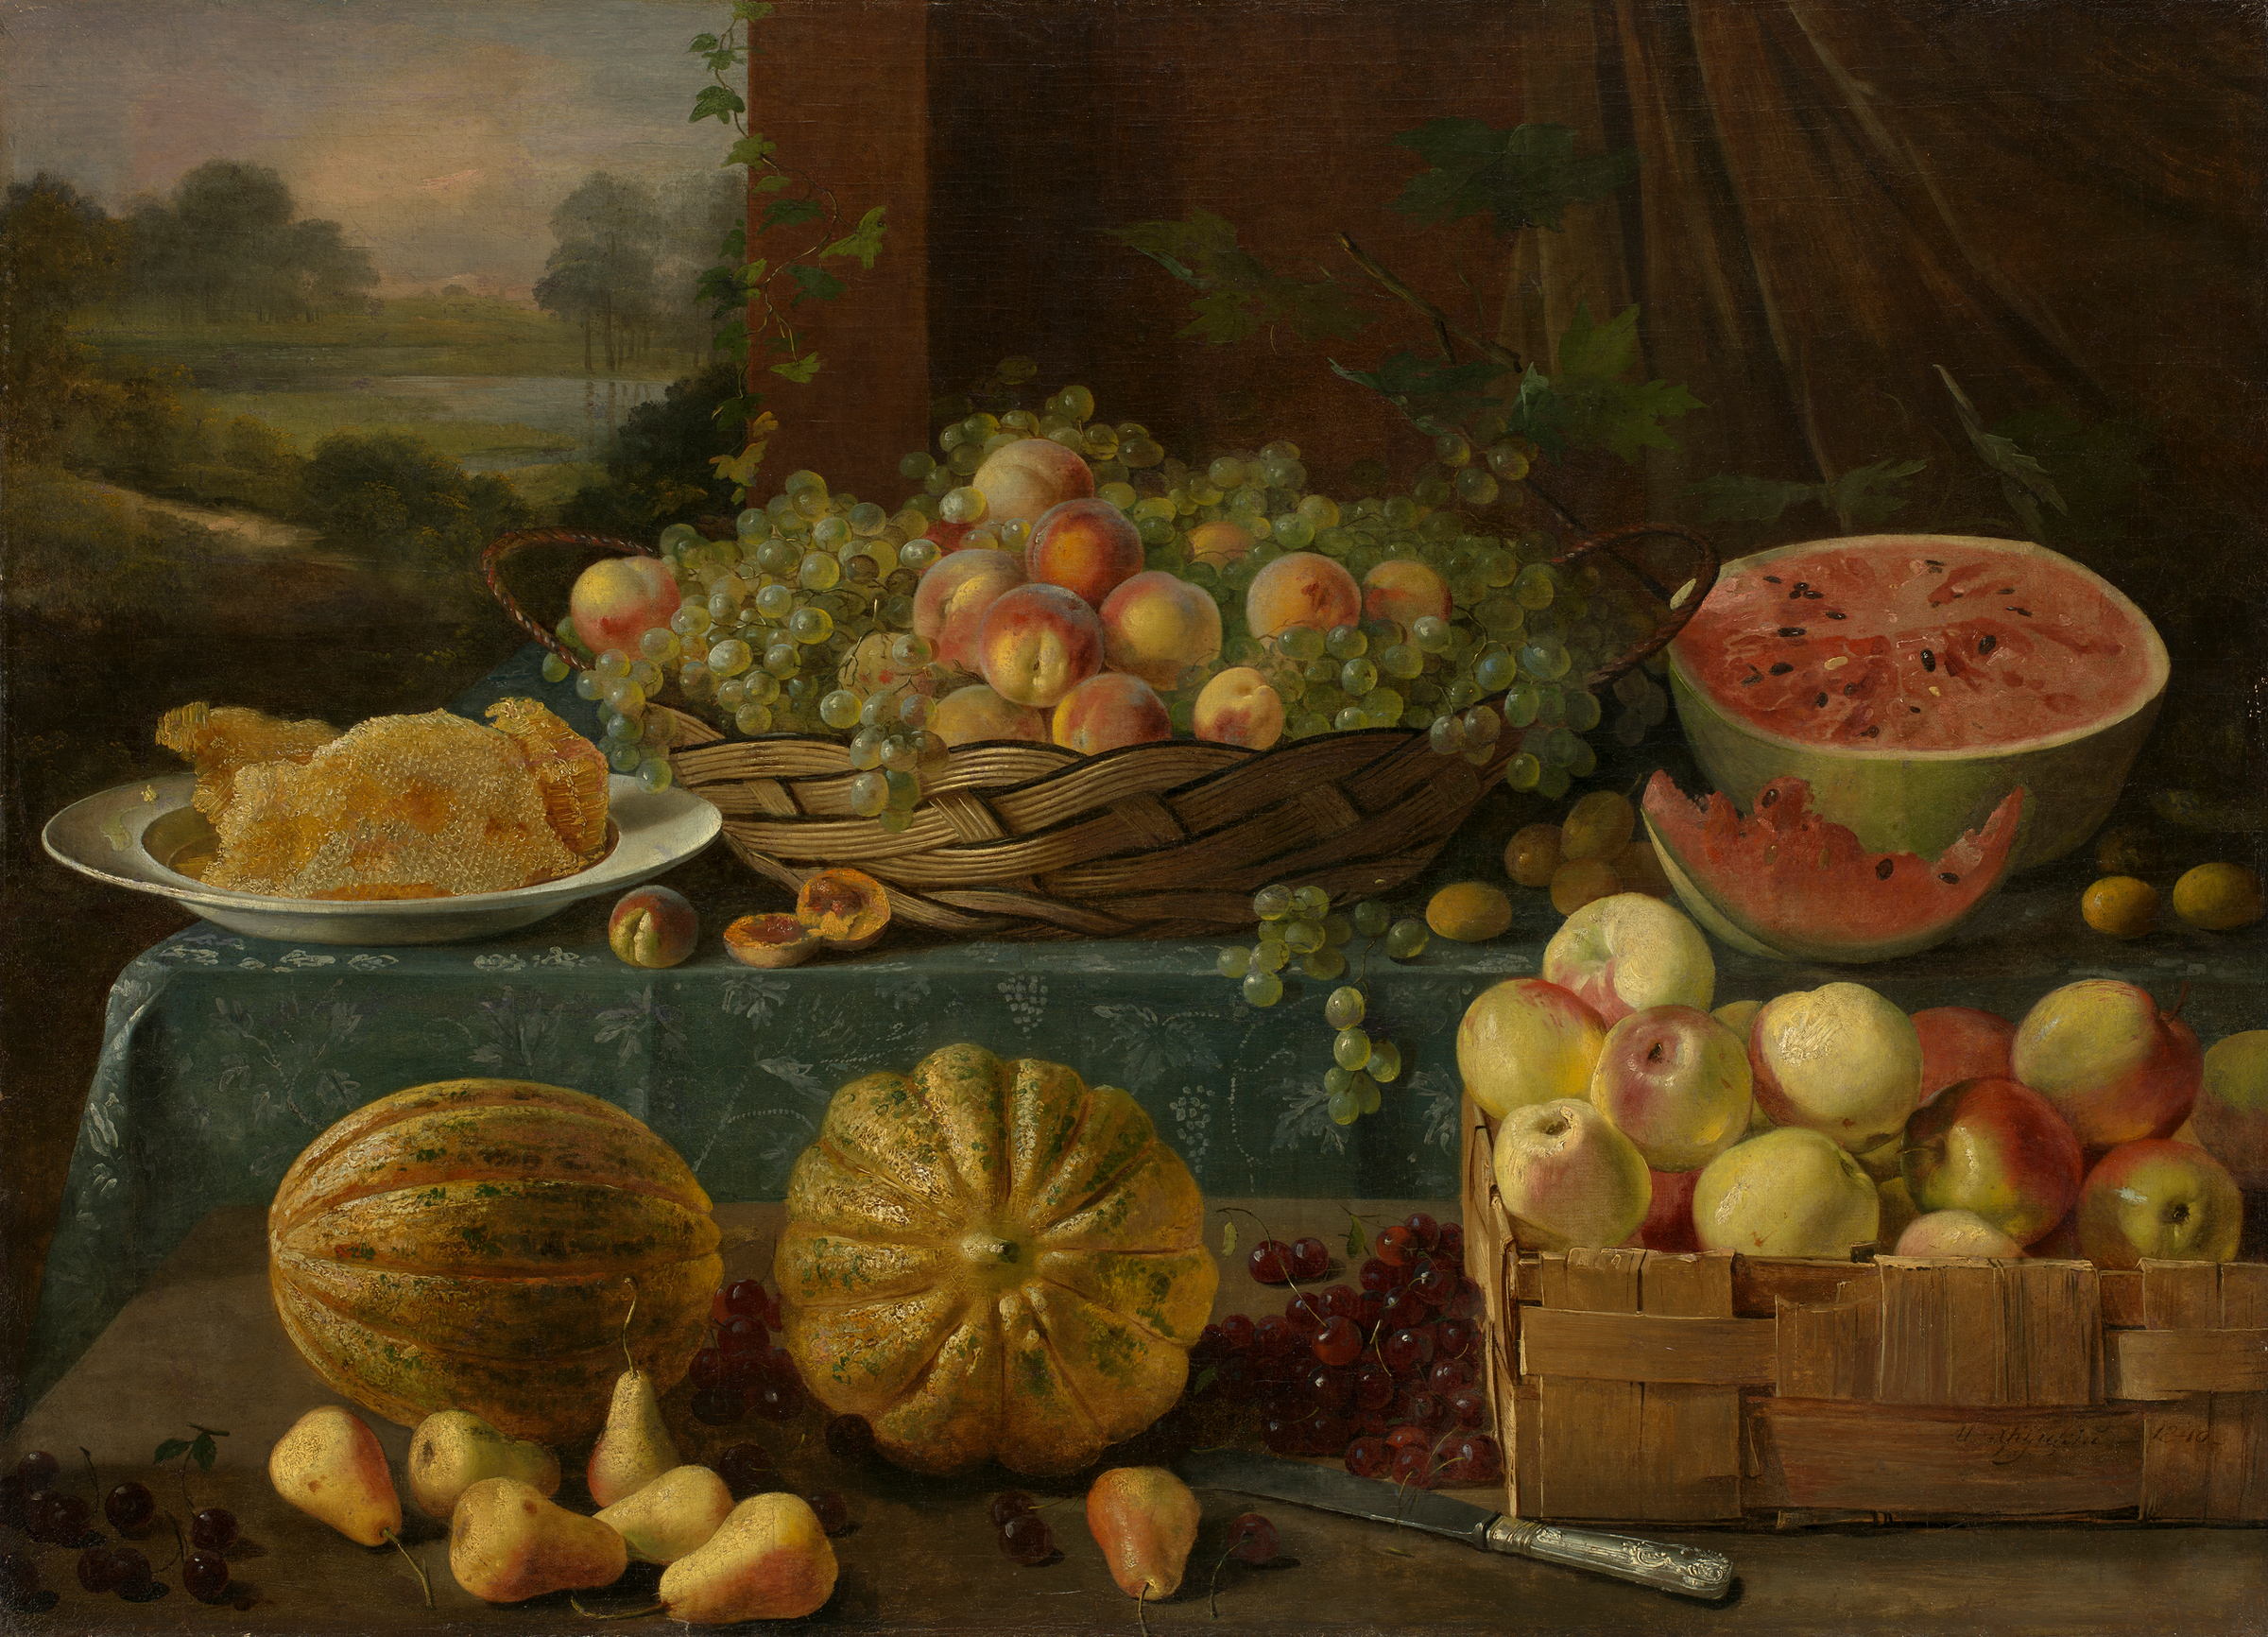 <a href='/en/catalogue/view?id=14529'>Lot 19.</a> KHRUTSKY, IVAN, <i>Still Life with Fruit and Honeycomb</i><br> SOLD FOR 222,750 GBP.